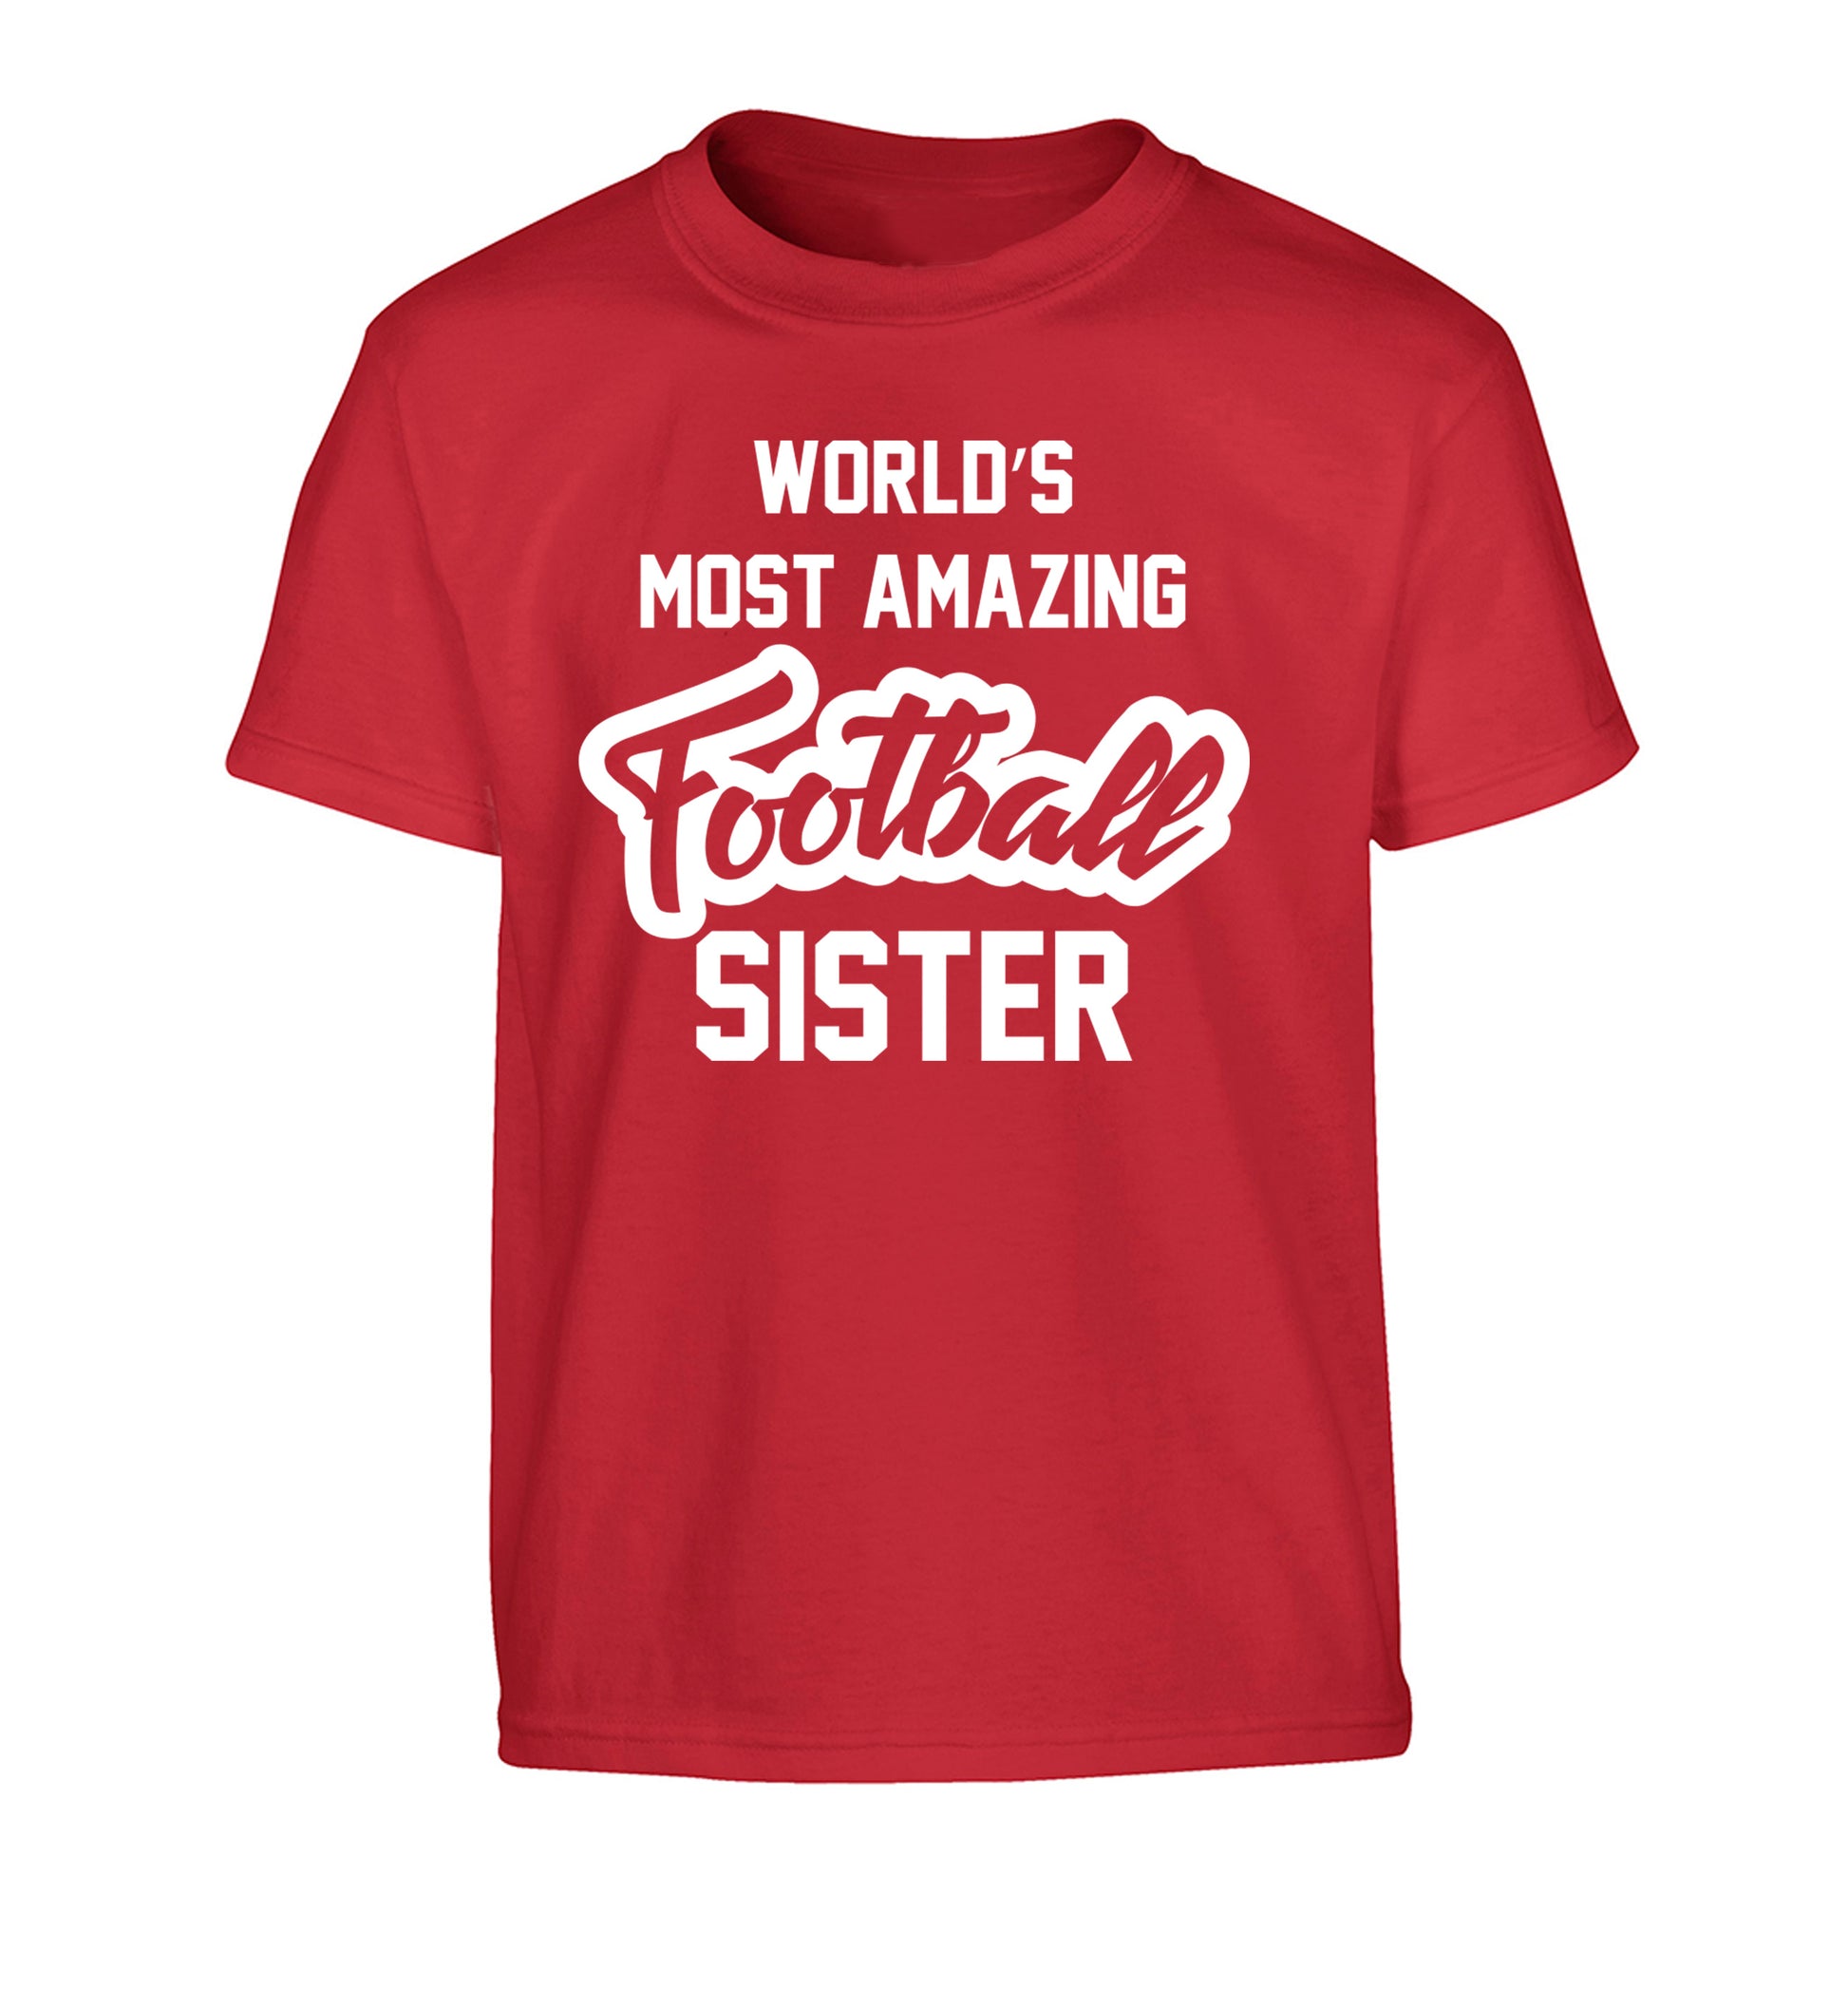 Worlds most amazing football sister Children's red Tshirt 12-14 Years